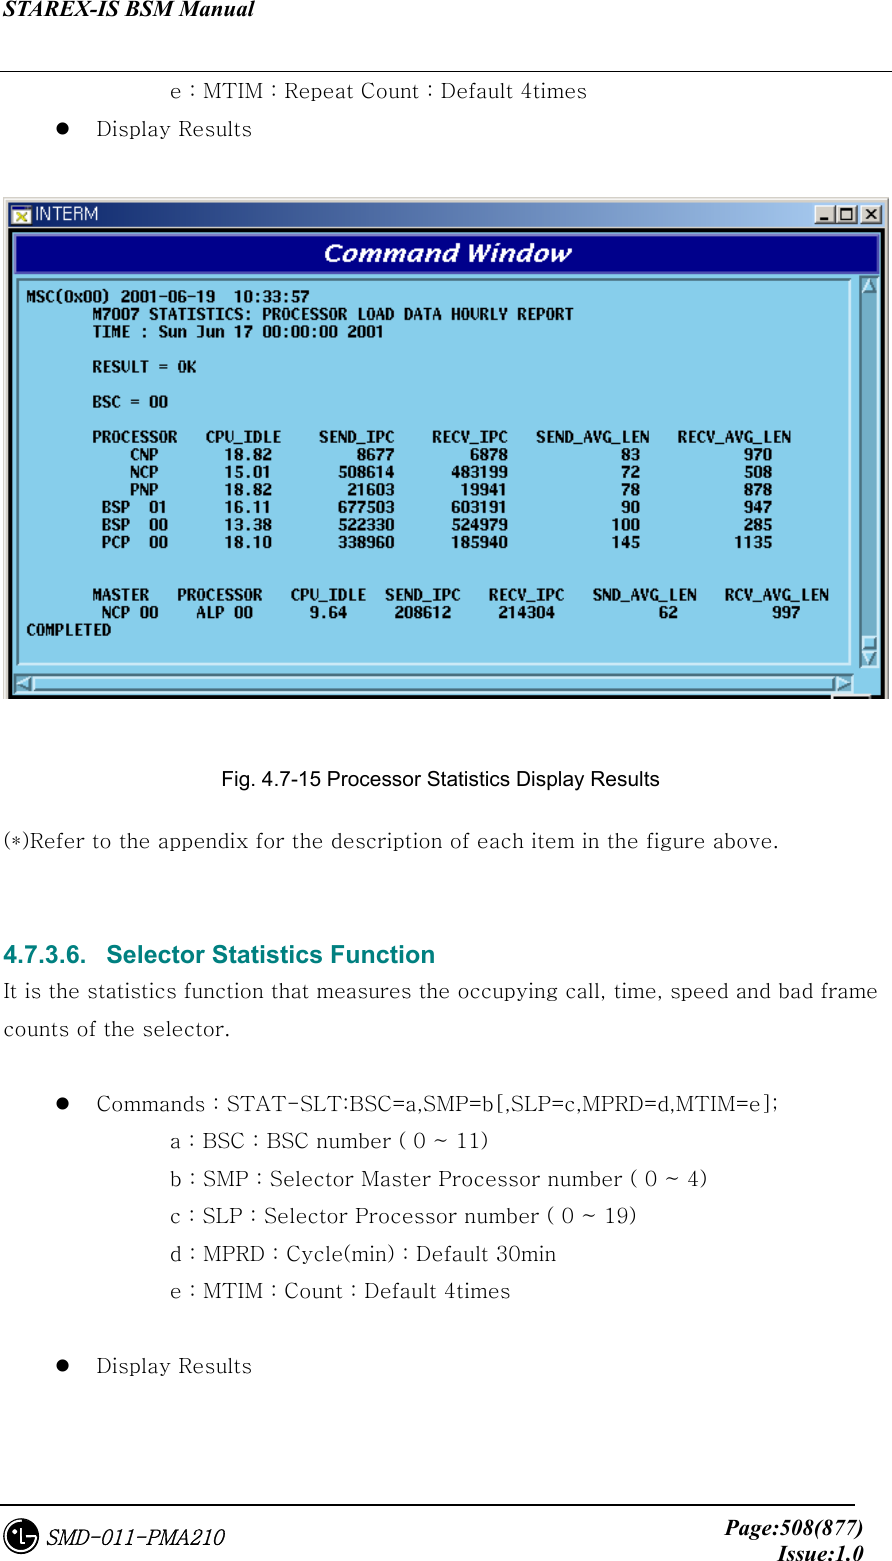 STAREX-IS BSM Manual     Page:508(877)Issue:1.0SMD-011-PMA210       e : MTIM : Repeat Count : Default 4times   Display Results   Fig. 4.7-15 Processor Statistics Display Results (*)Refer to the appendix for the description of each item in the figure above.   4.7.3.6.   Selector Statistics Function It is the statistics function that measures the occupying call, time, speed and bad frame counts of the selector.      Commands : STAT-SLT:BSC=a,SMP=b[,SLP=c,MPRD=d,MTIM=e];       a : BSC : BSC number ( 0 ~ 11)         b : SMP : Selector Master Processor number ( 0 ~ 4)       c : SLP : Selector Processor number ( 0 ~ 19)       d : MPRD : Cycle(min) : Default 30min       e : MTIM : Count : Default 4times    Display Results  